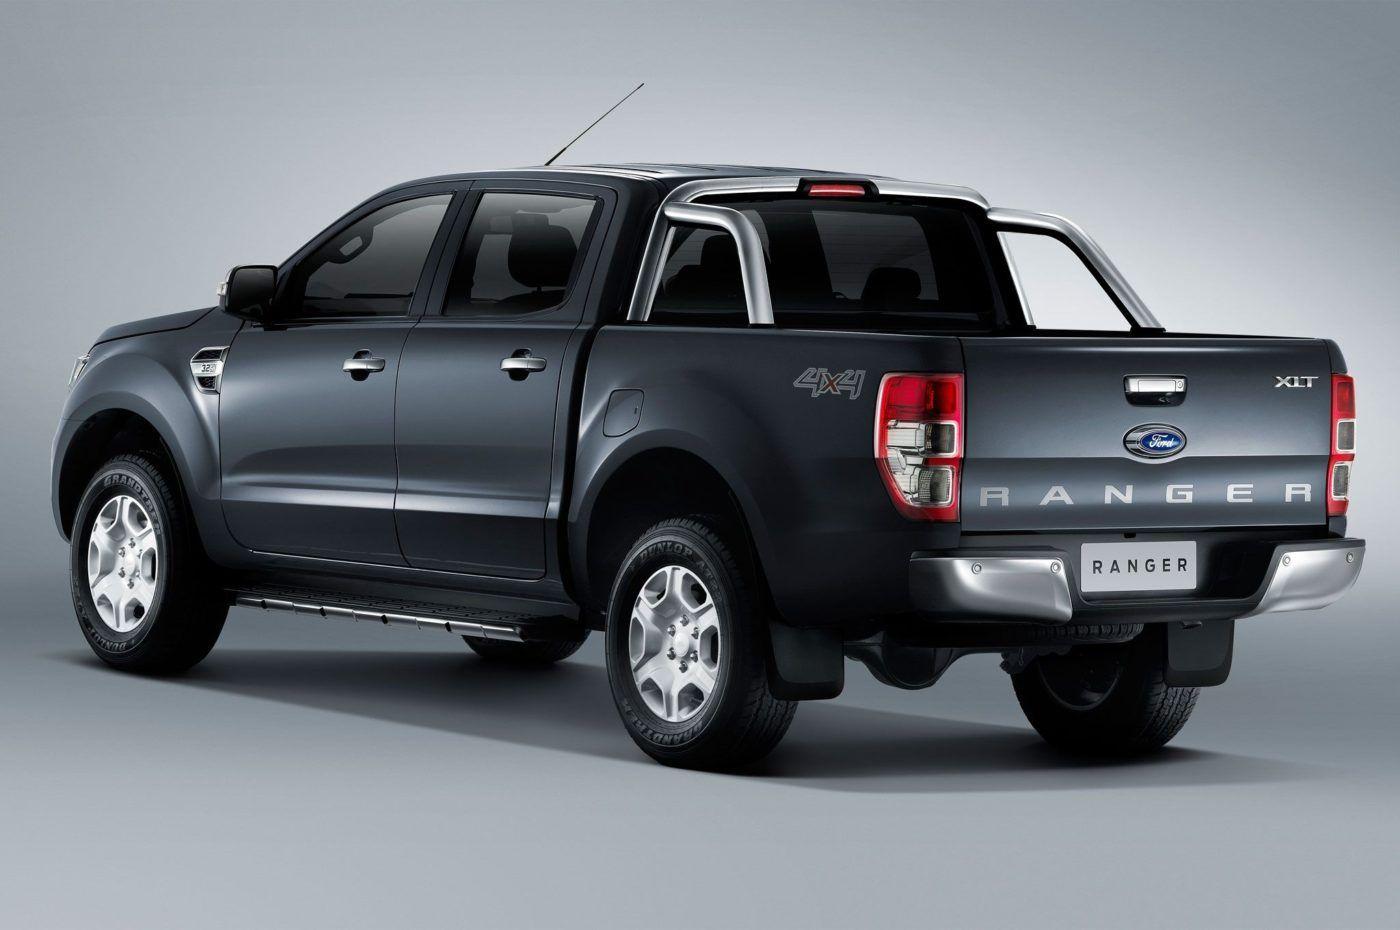 Ford Ranger. Interior HD Wallpaper. Car Release Preview